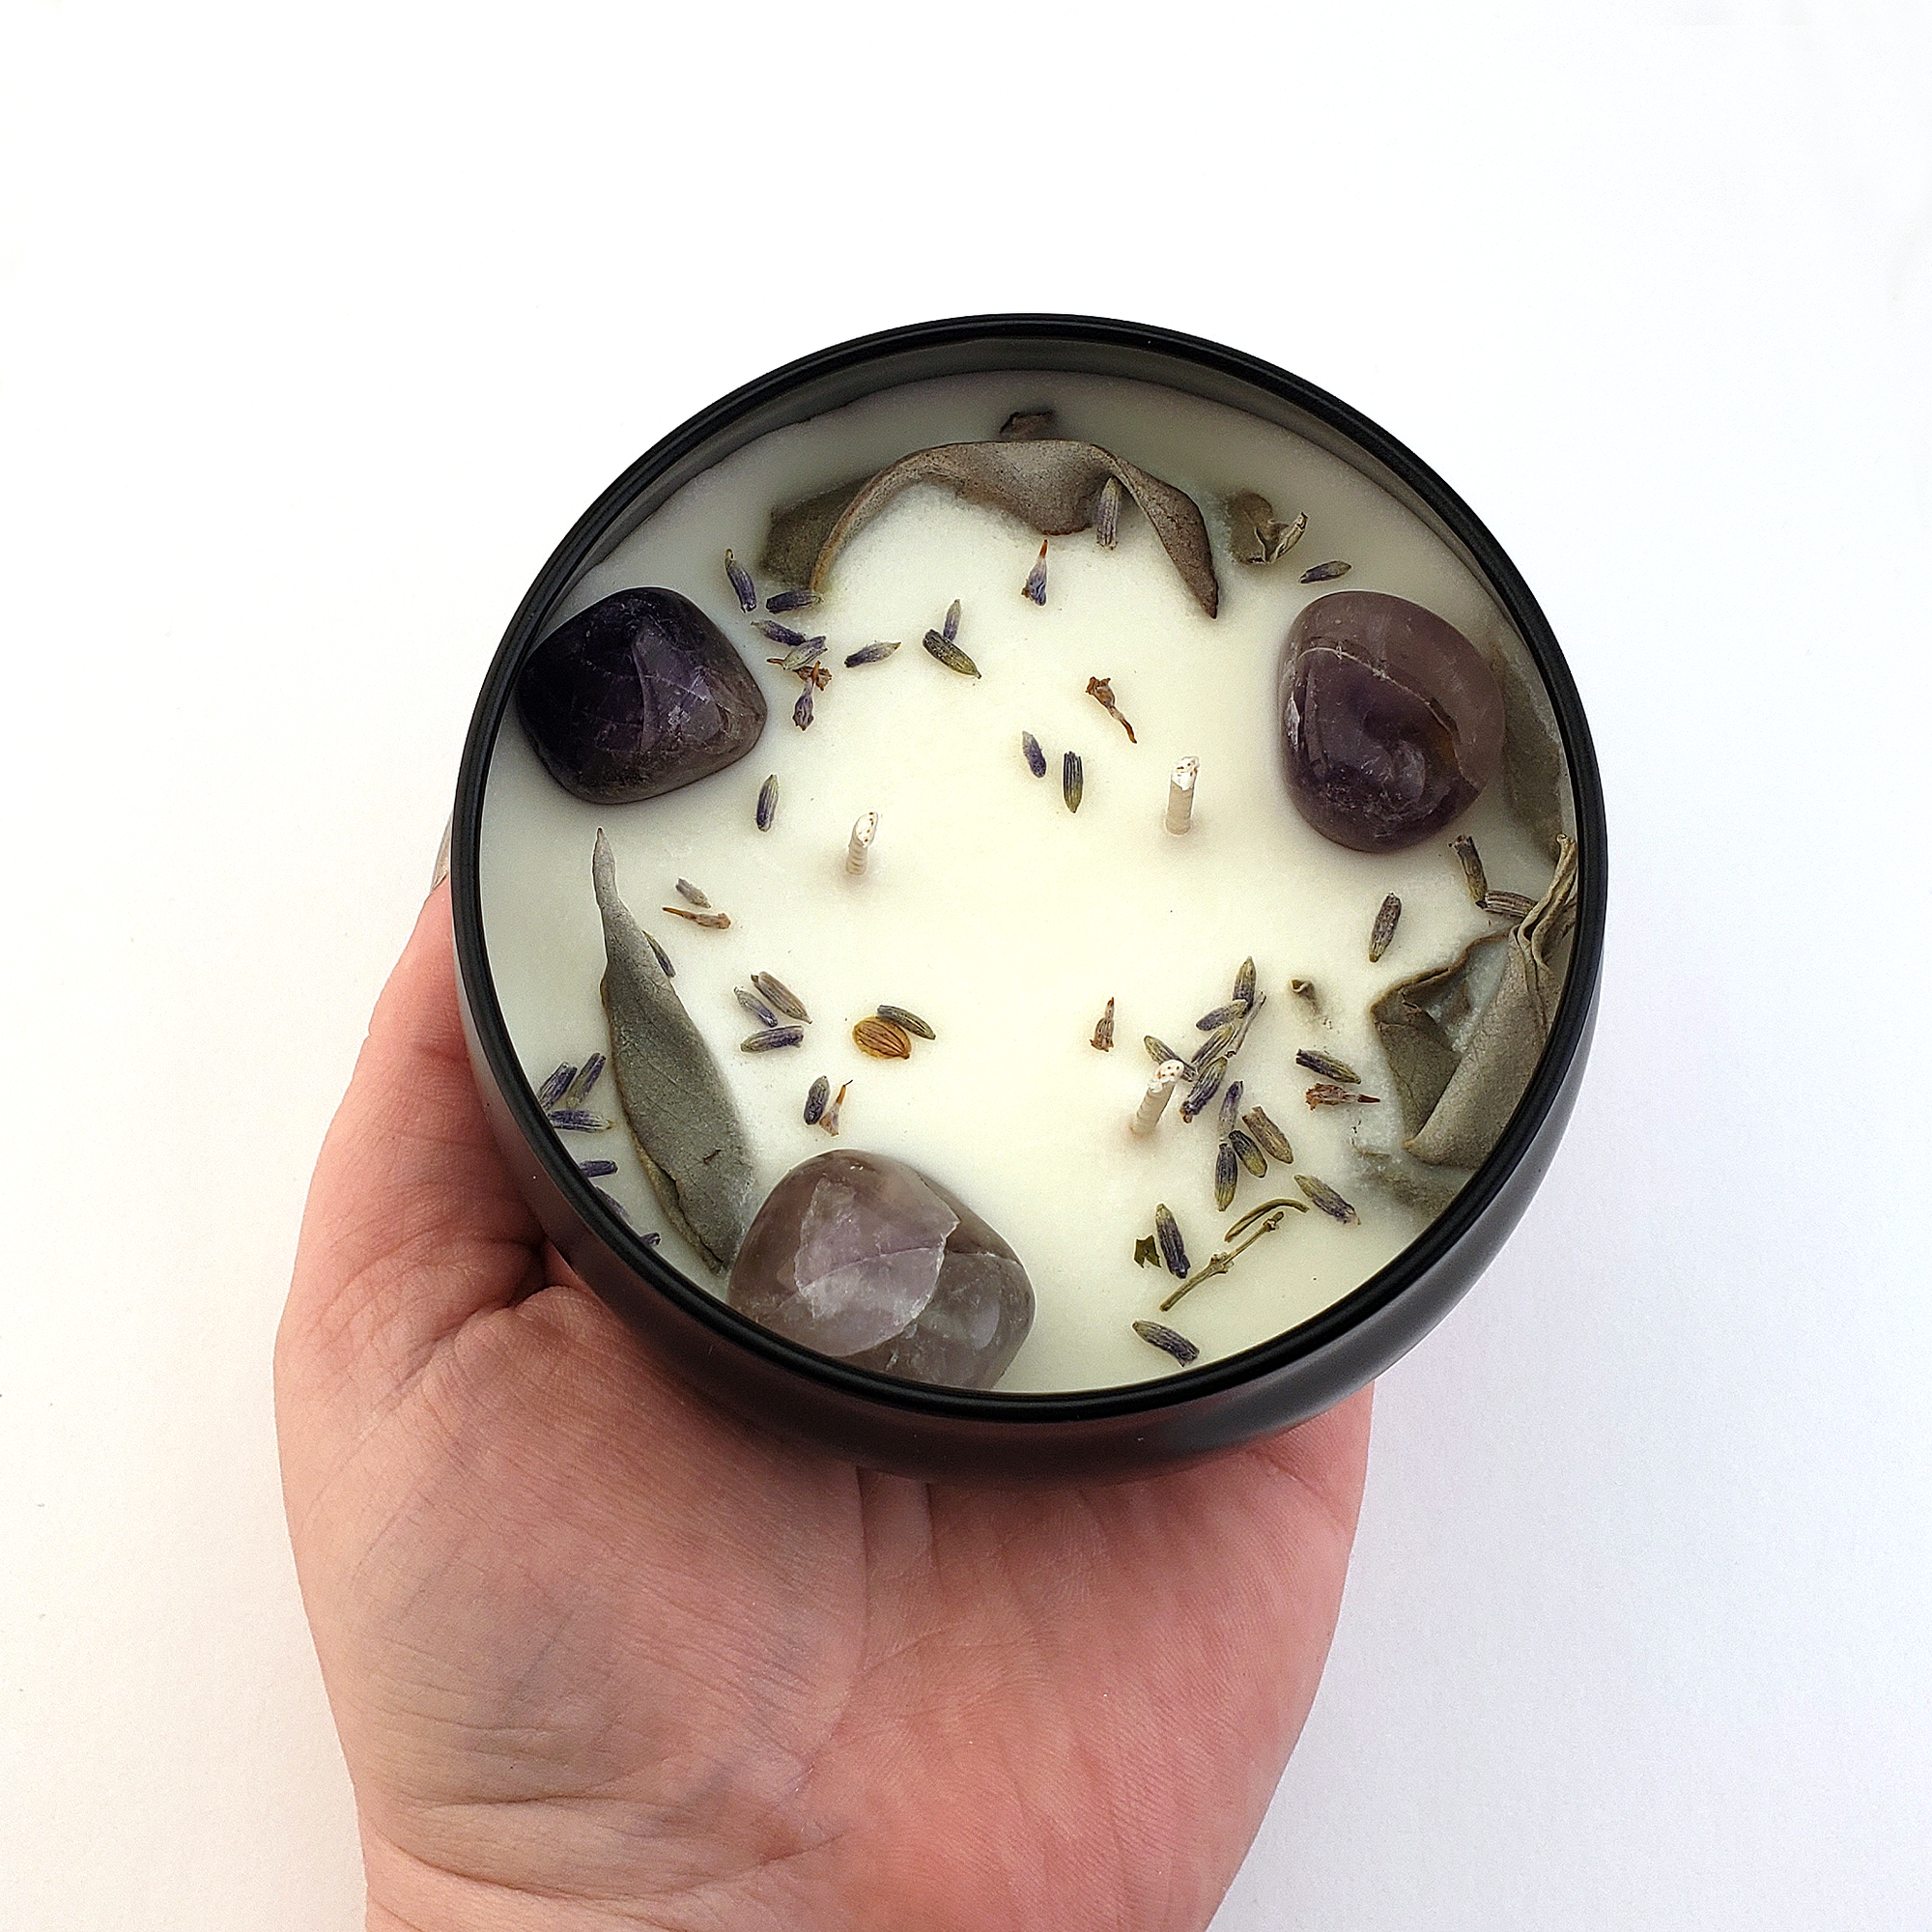 Calming Lavender - 6oz Handmade Coconut Soy Wax Scented Candle in Tin with Lid - In Hand